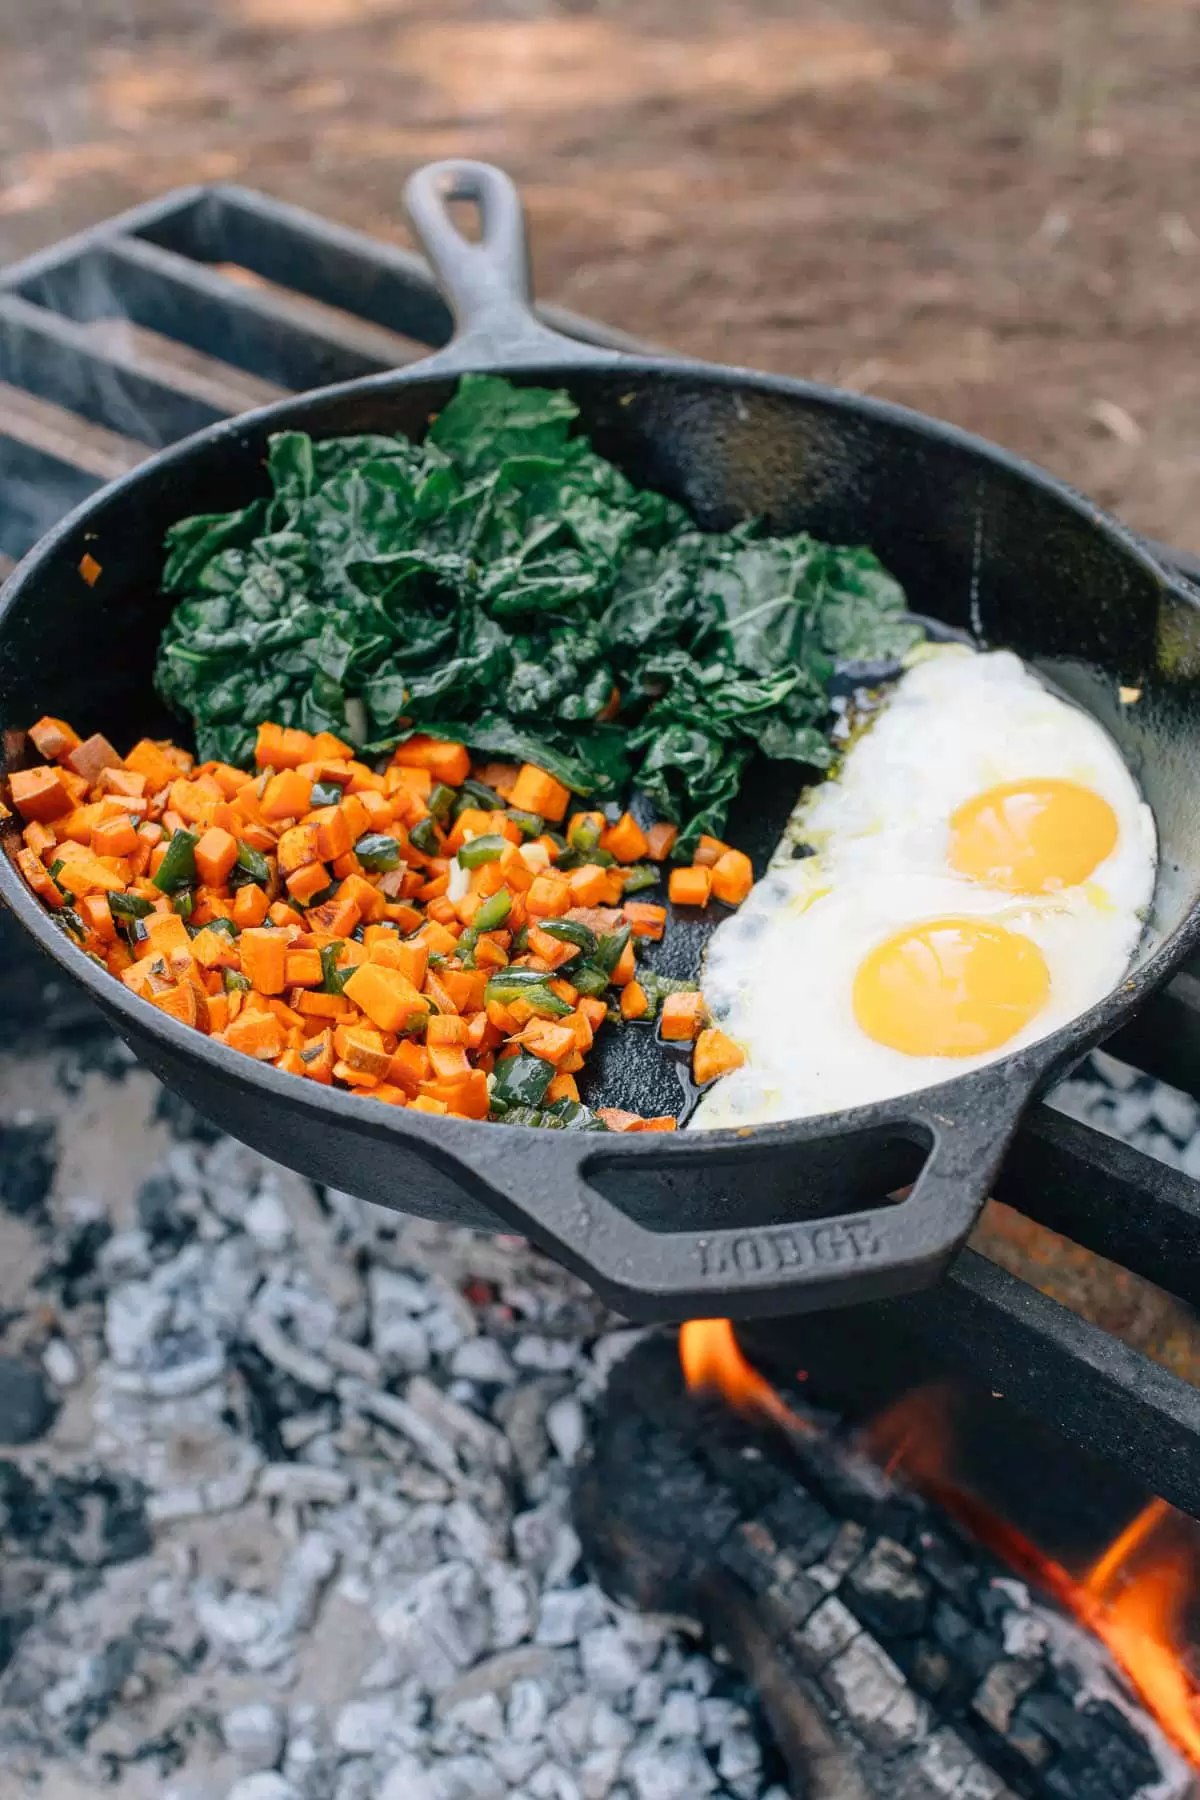 Breakfast hash and eggs in a cast iron skillet over a campfire